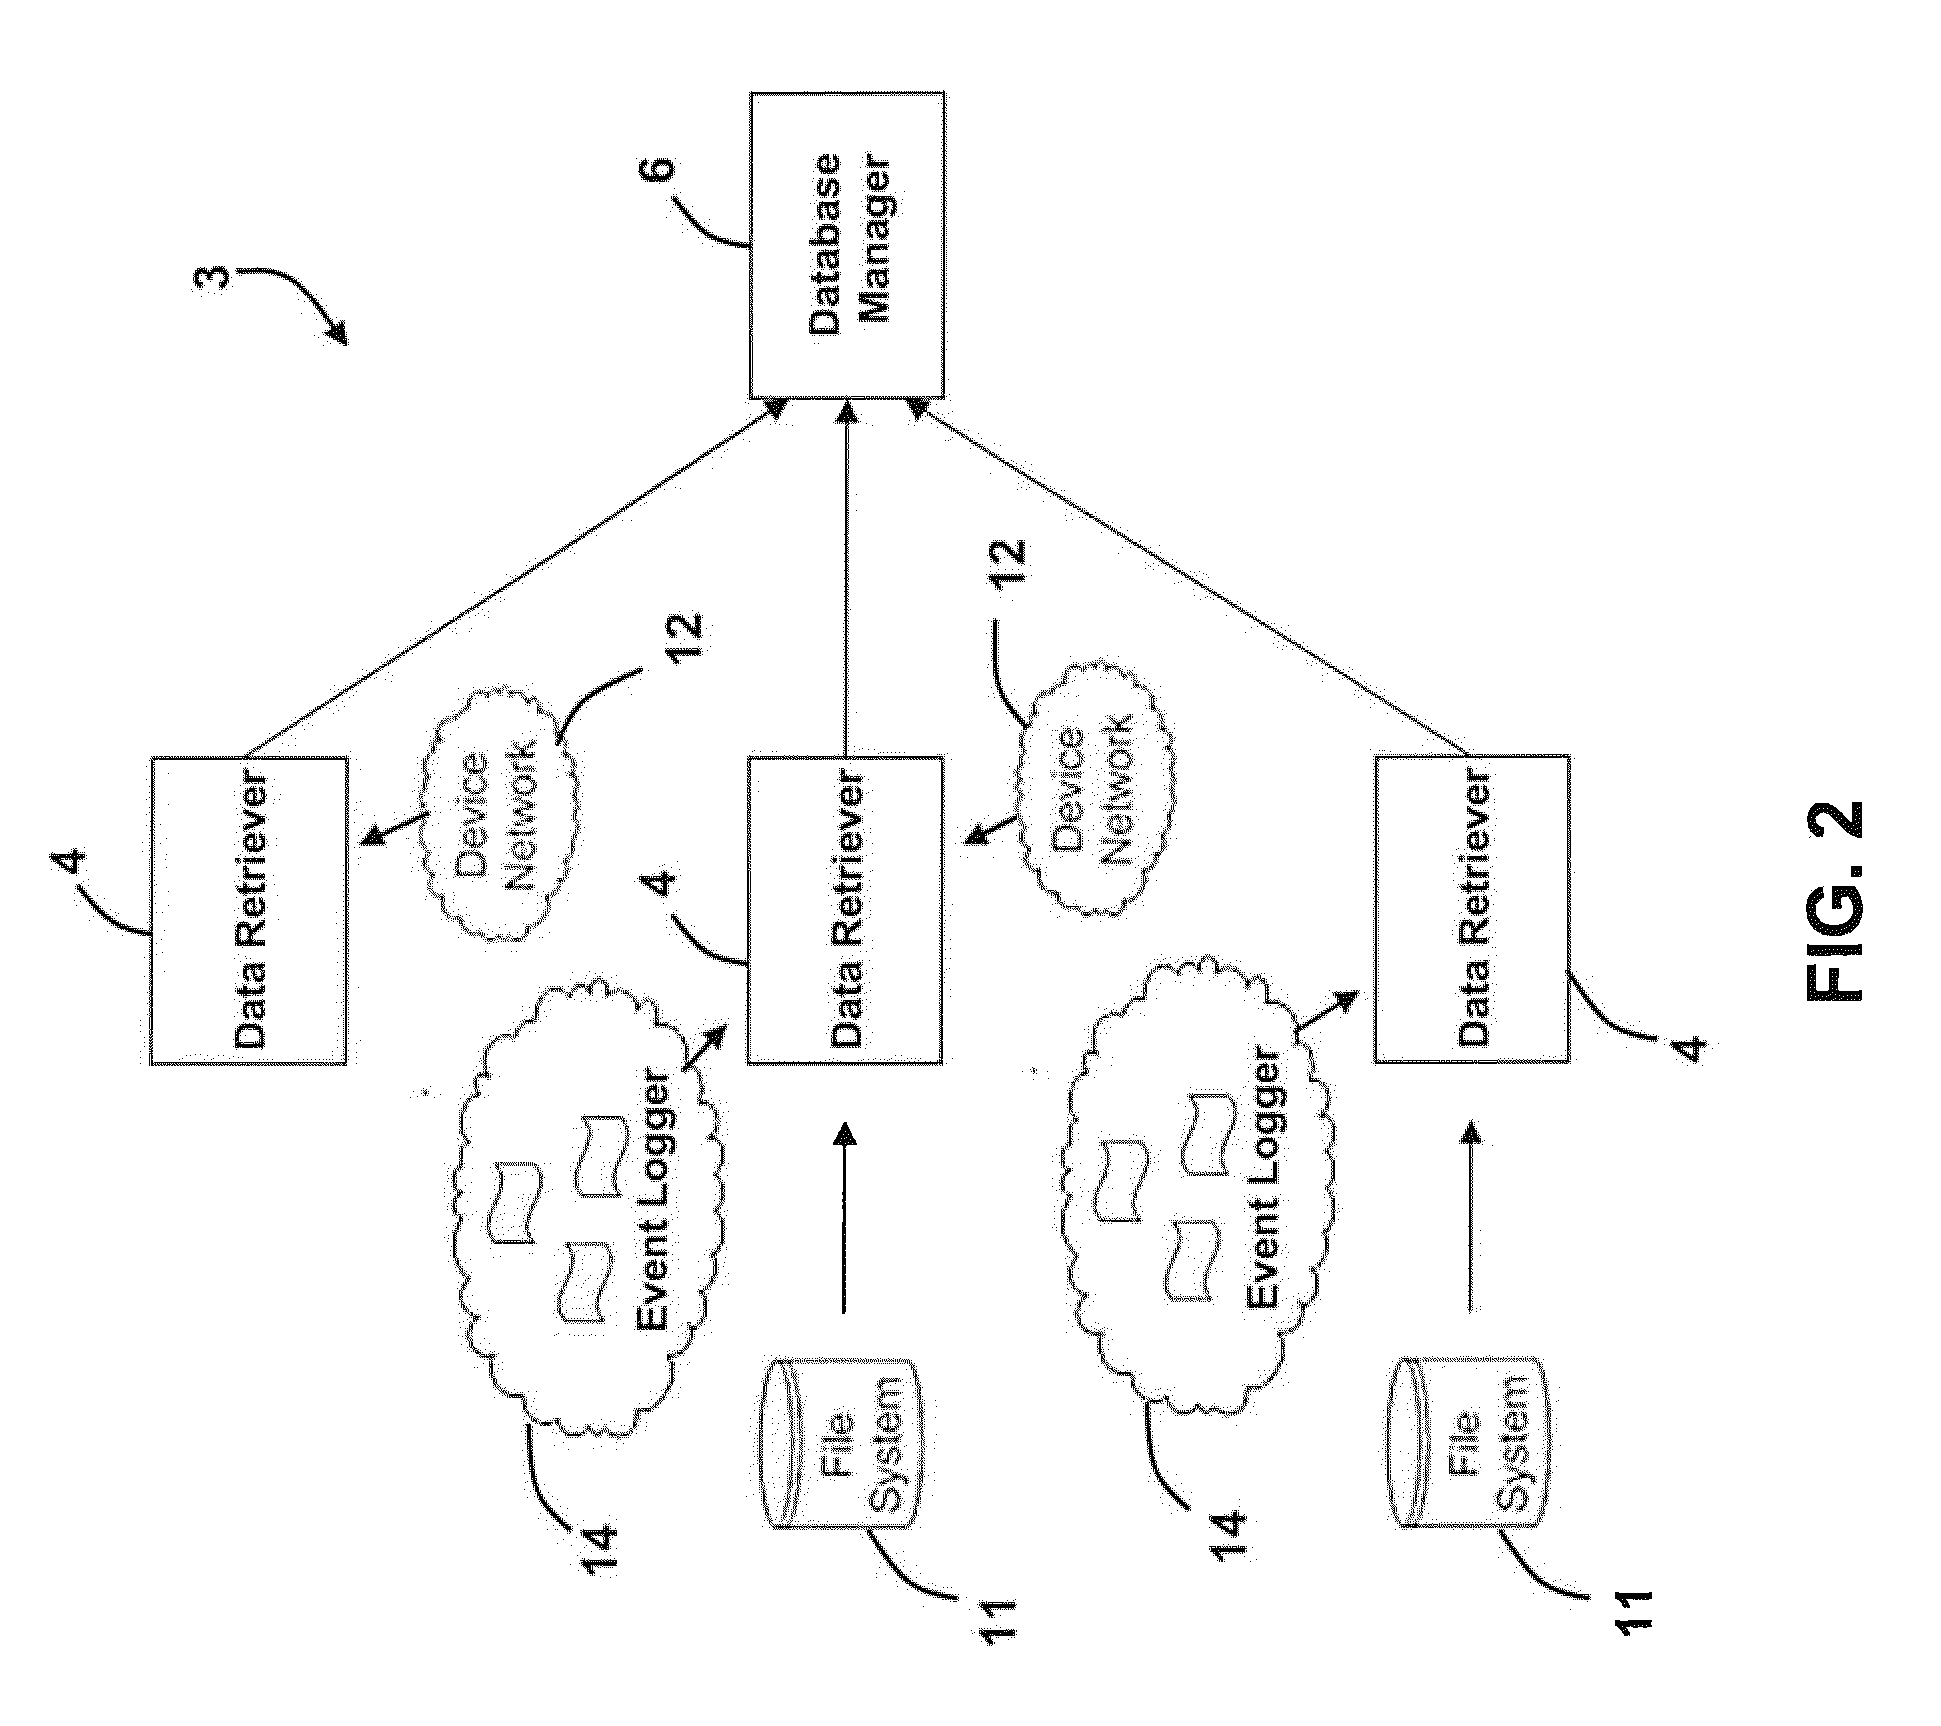 System and Method for Retrieving and Storing Industrial Data